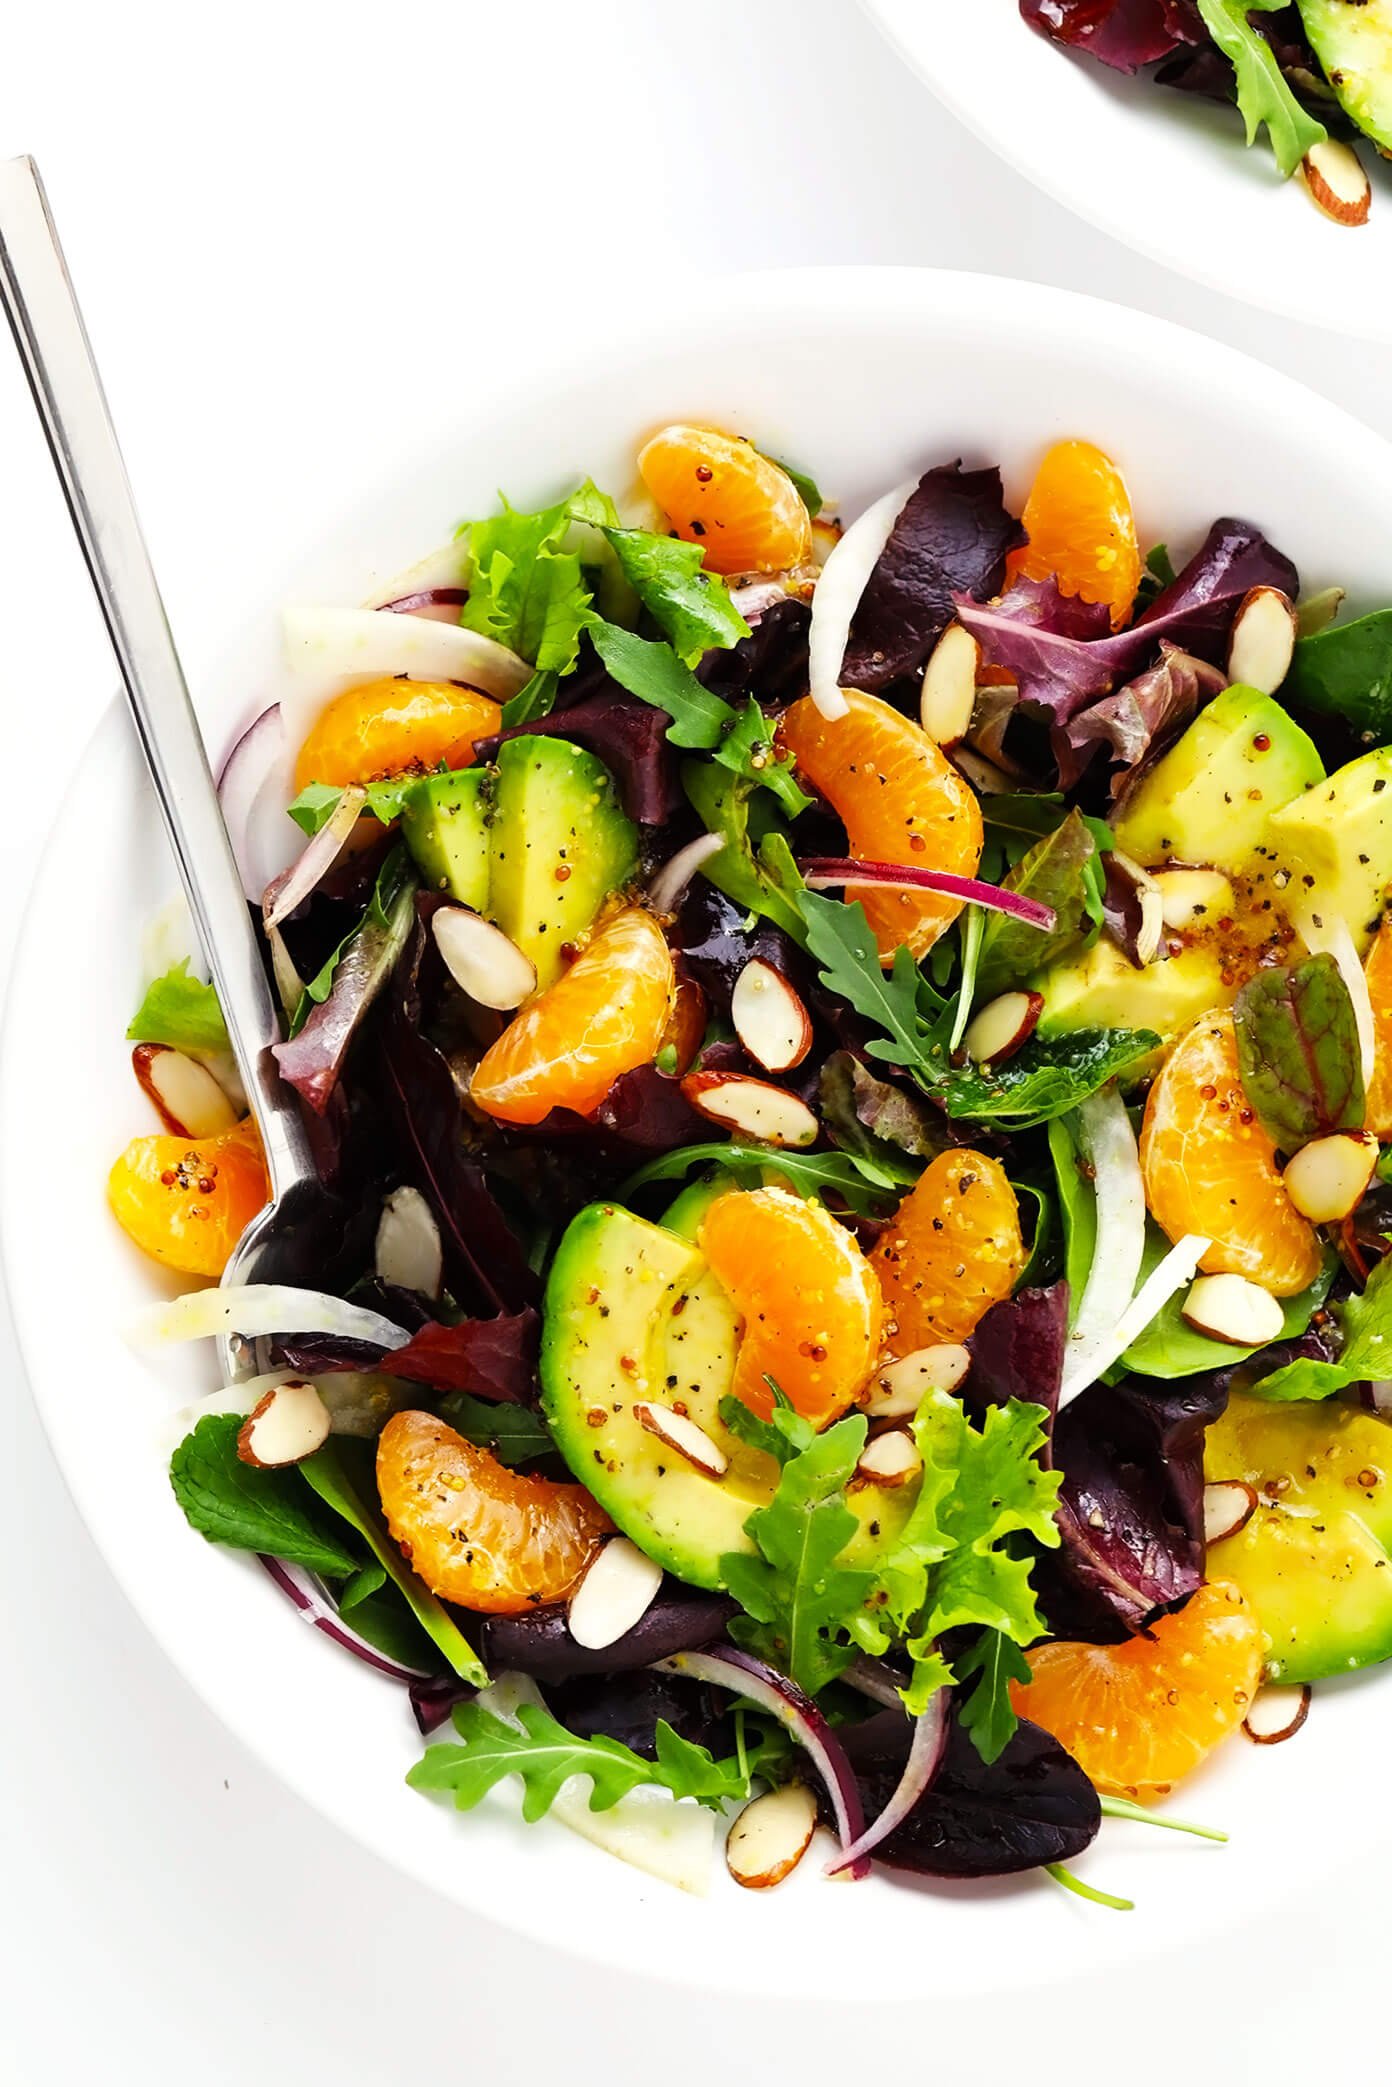 Orange, Fellen and Avocado Salad in Serving Bowl with Almonds